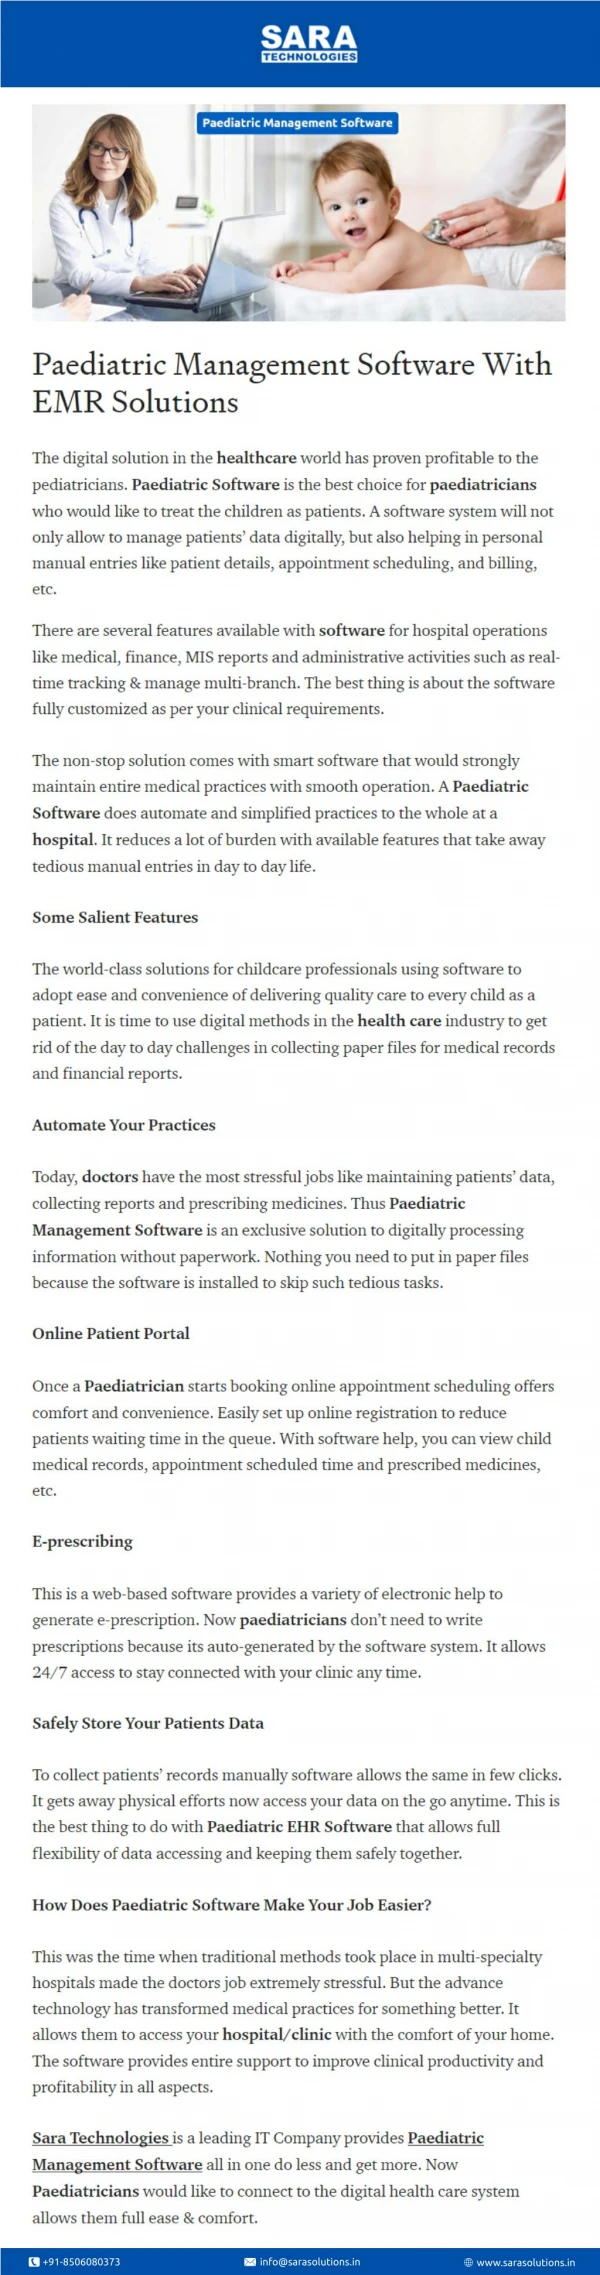 Paediatric Management Software With EMR Solutions